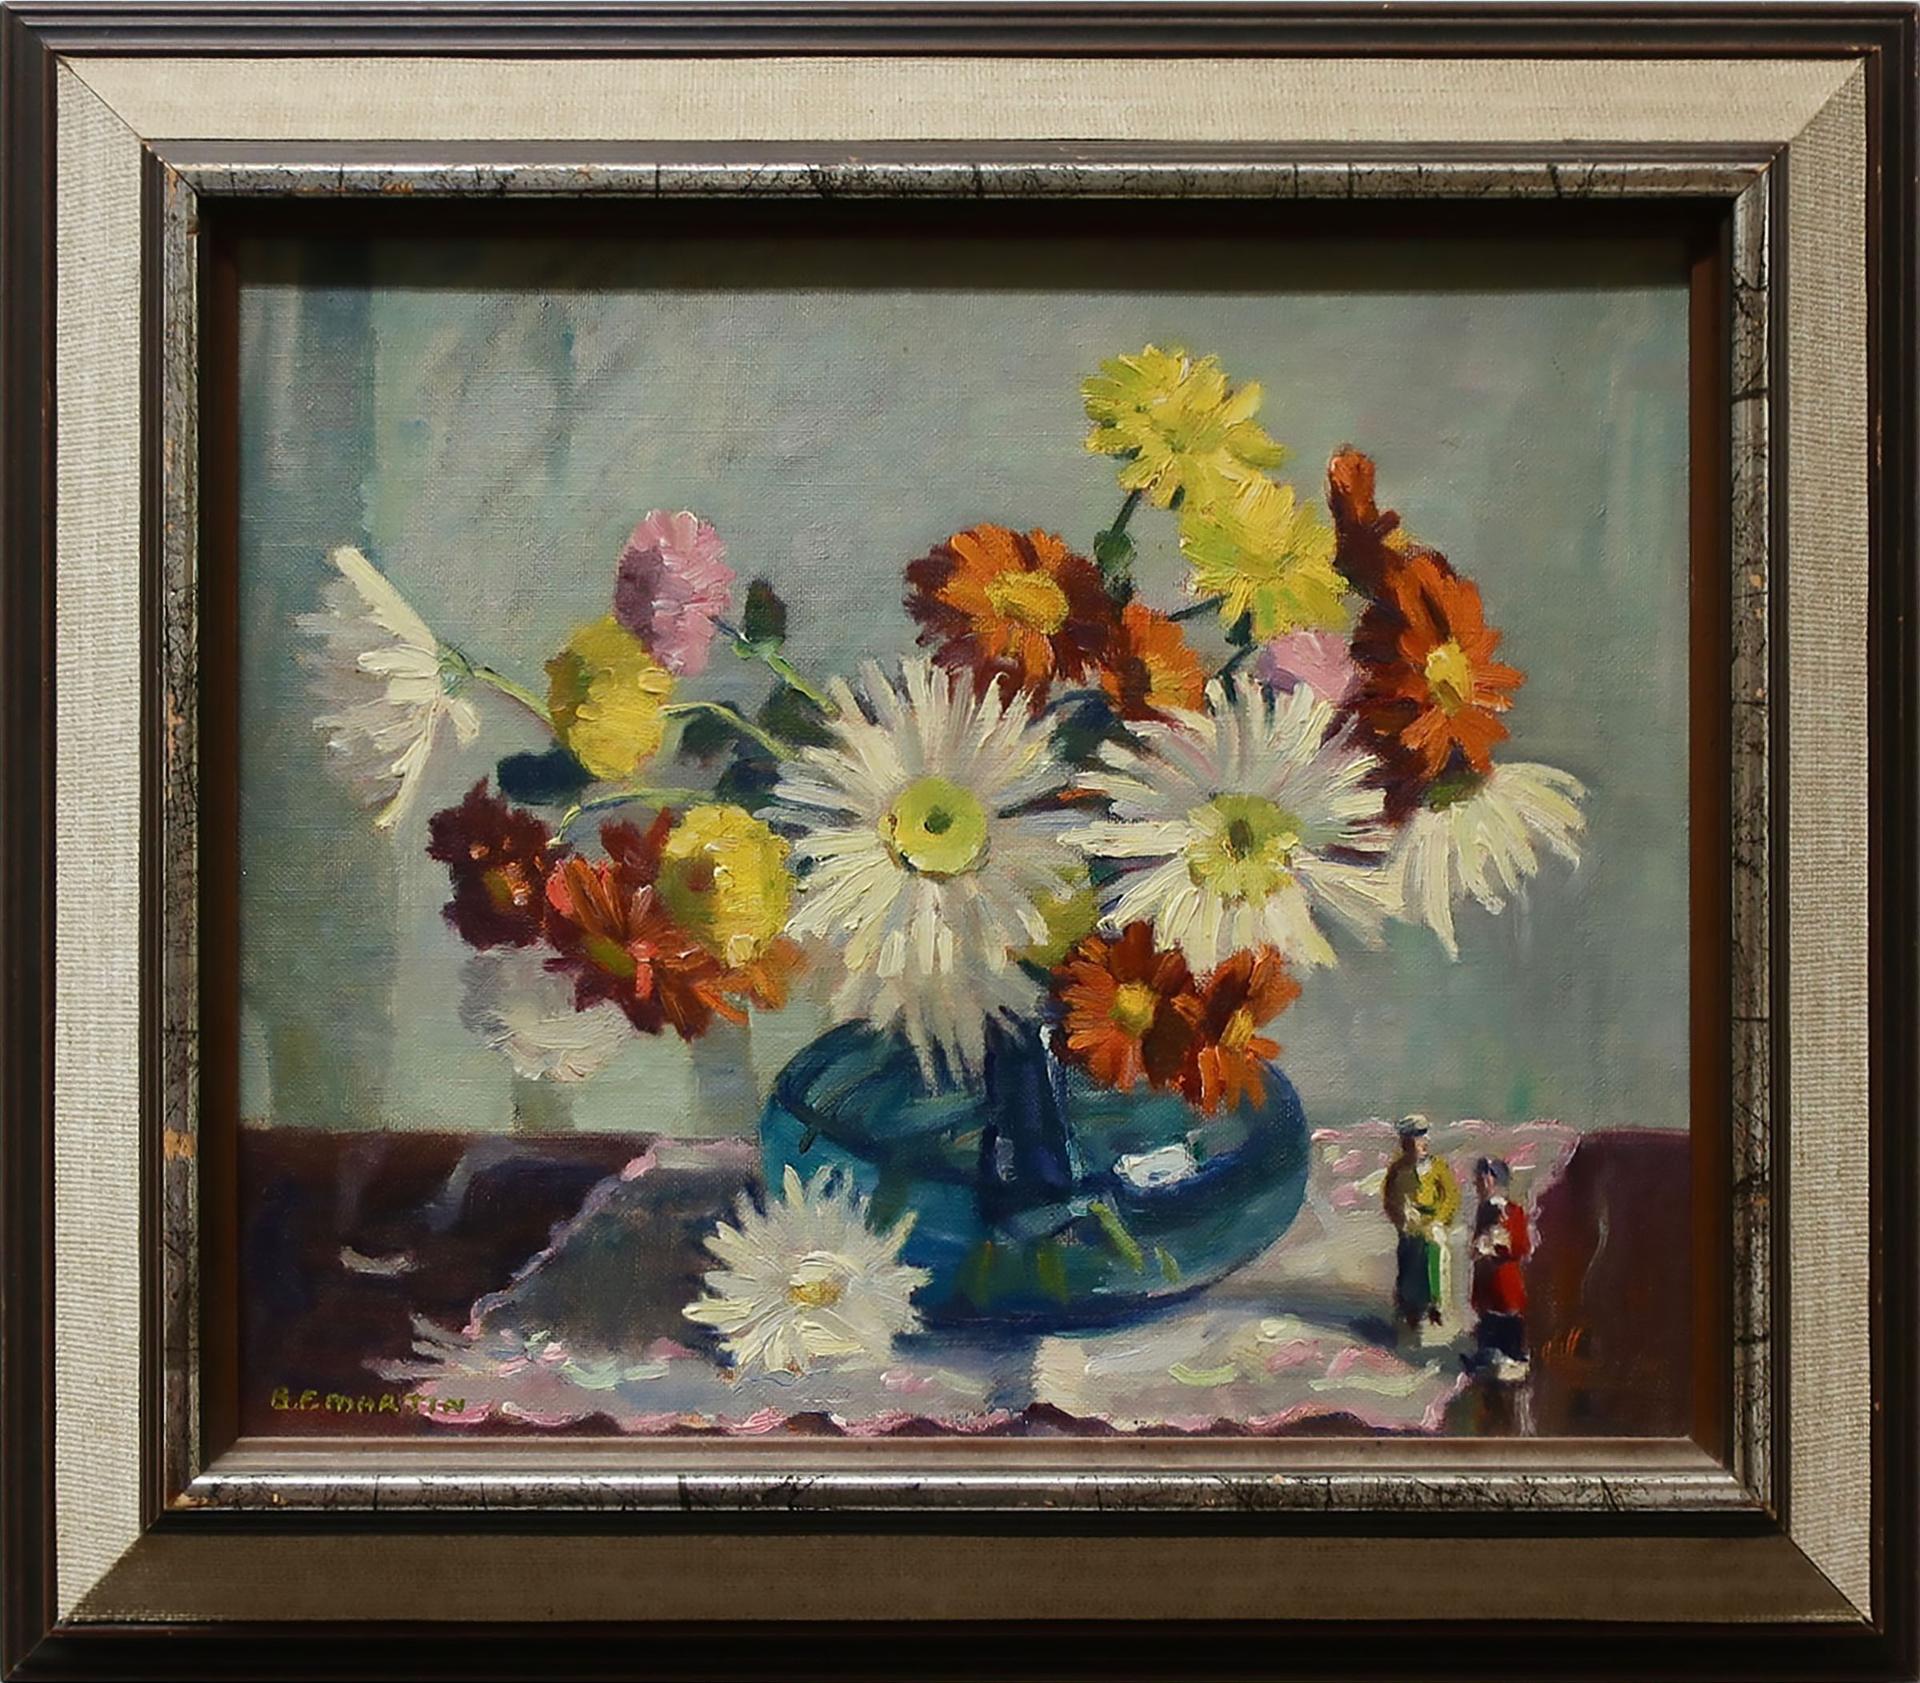 Bernice Fenwick Martin (1902-1999) - Untitled (Daisies In A Blue Glass Jug With Figurines)